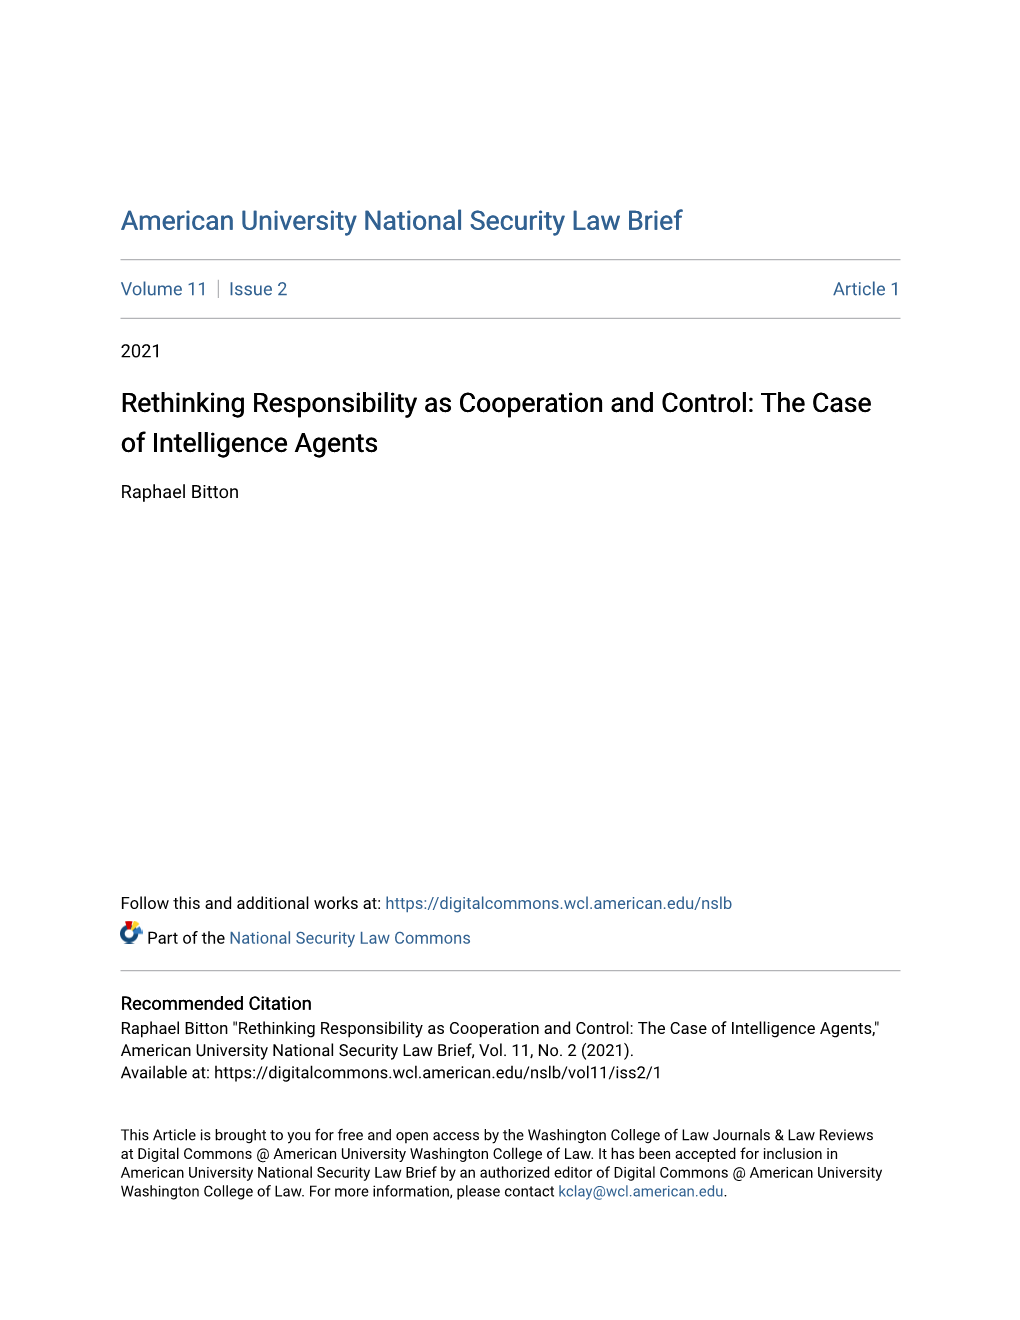 Rethinking Responsibility As Cooperation and Control: the Case of Intelligence Agents